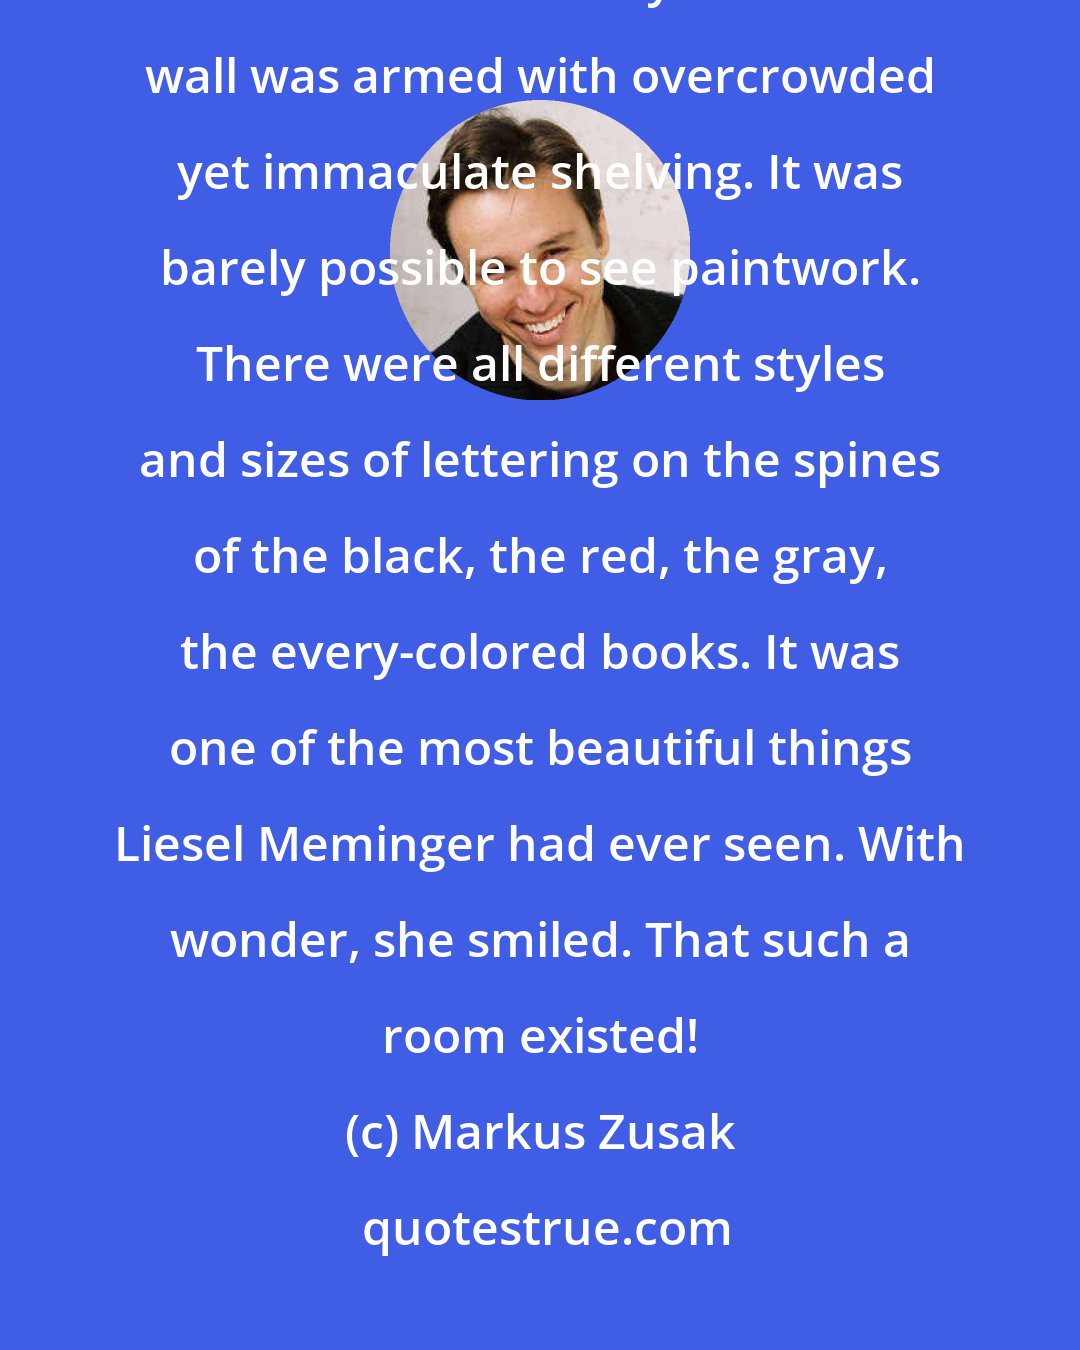 Markus Zusak: She said it out loud, the words distributed into a room that was full of cold air and books. Books everywhere! Each wall was armed with overcrowded yet immaculate shelving. It was barely possible to see paintwork. There were all different styles and sizes of lettering on the spines of the black, the red, the gray, the every-colored books. It was one of the most beautiful things Liesel Meminger had ever seen. With wonder, she smiled. That such a room existed!